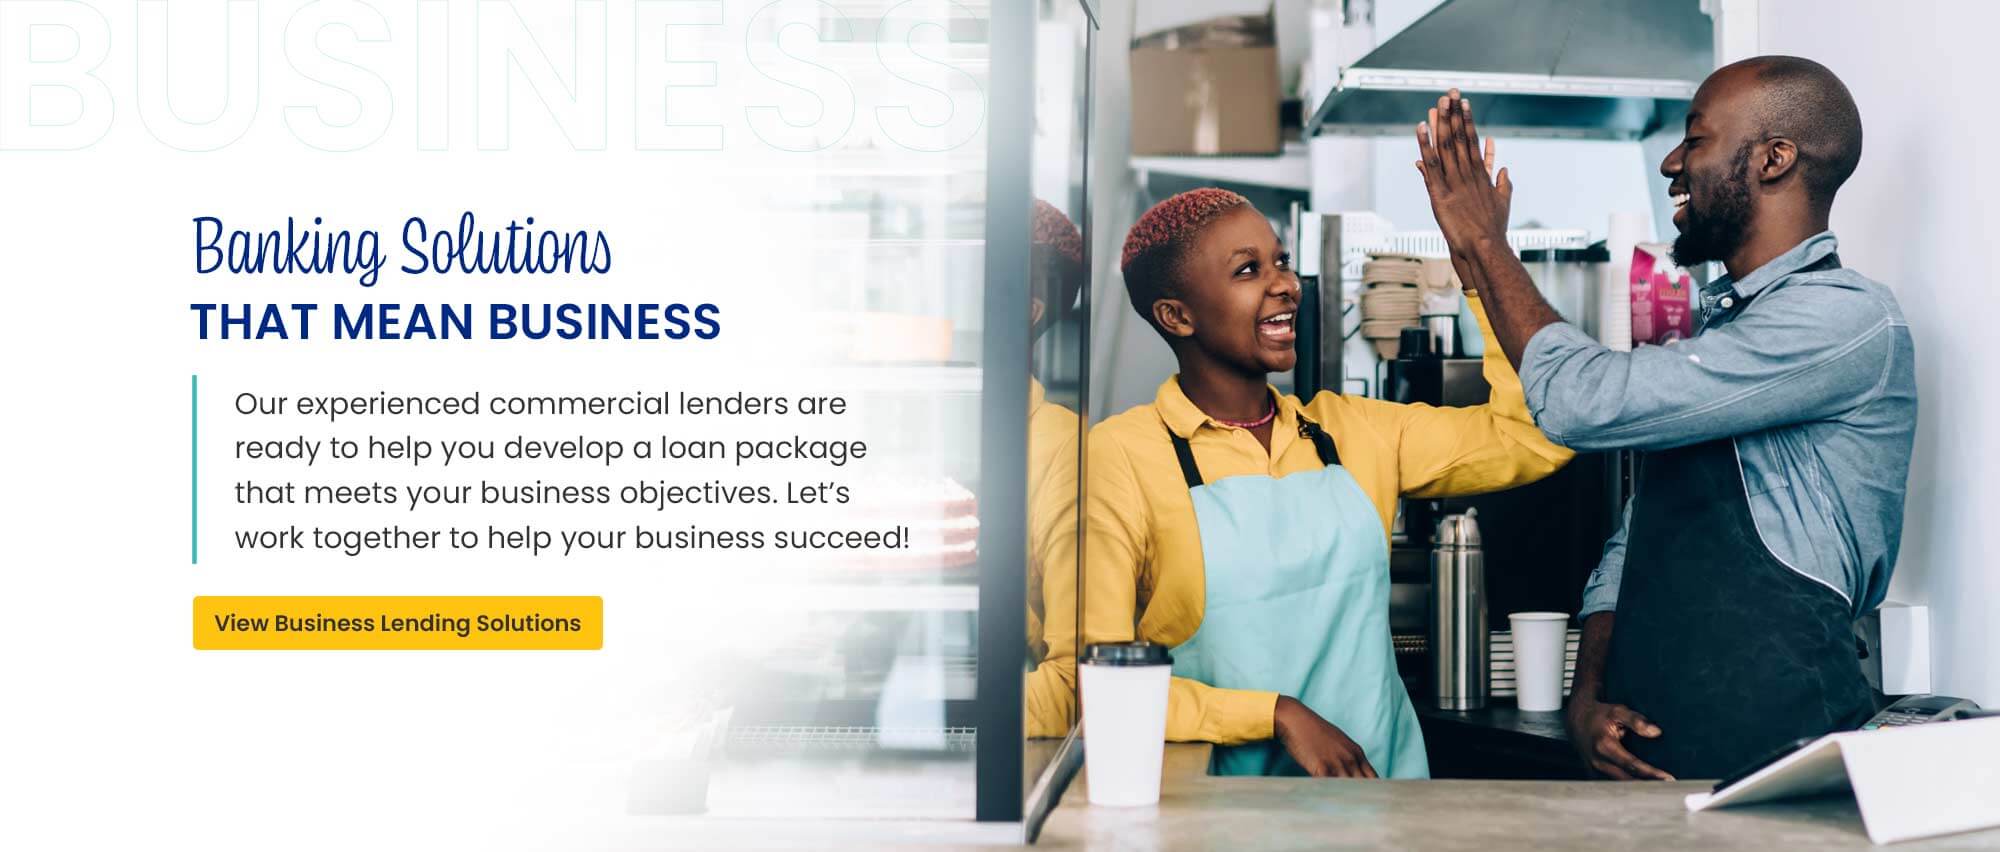 Banking Solutions That Mean Business. Our experienced commercial lenders are ready to help you develop a loan package that meets your business objectives. LetÃ¢â‚¬â„¢s work together to help your business succeed! View Business Lending Solutions